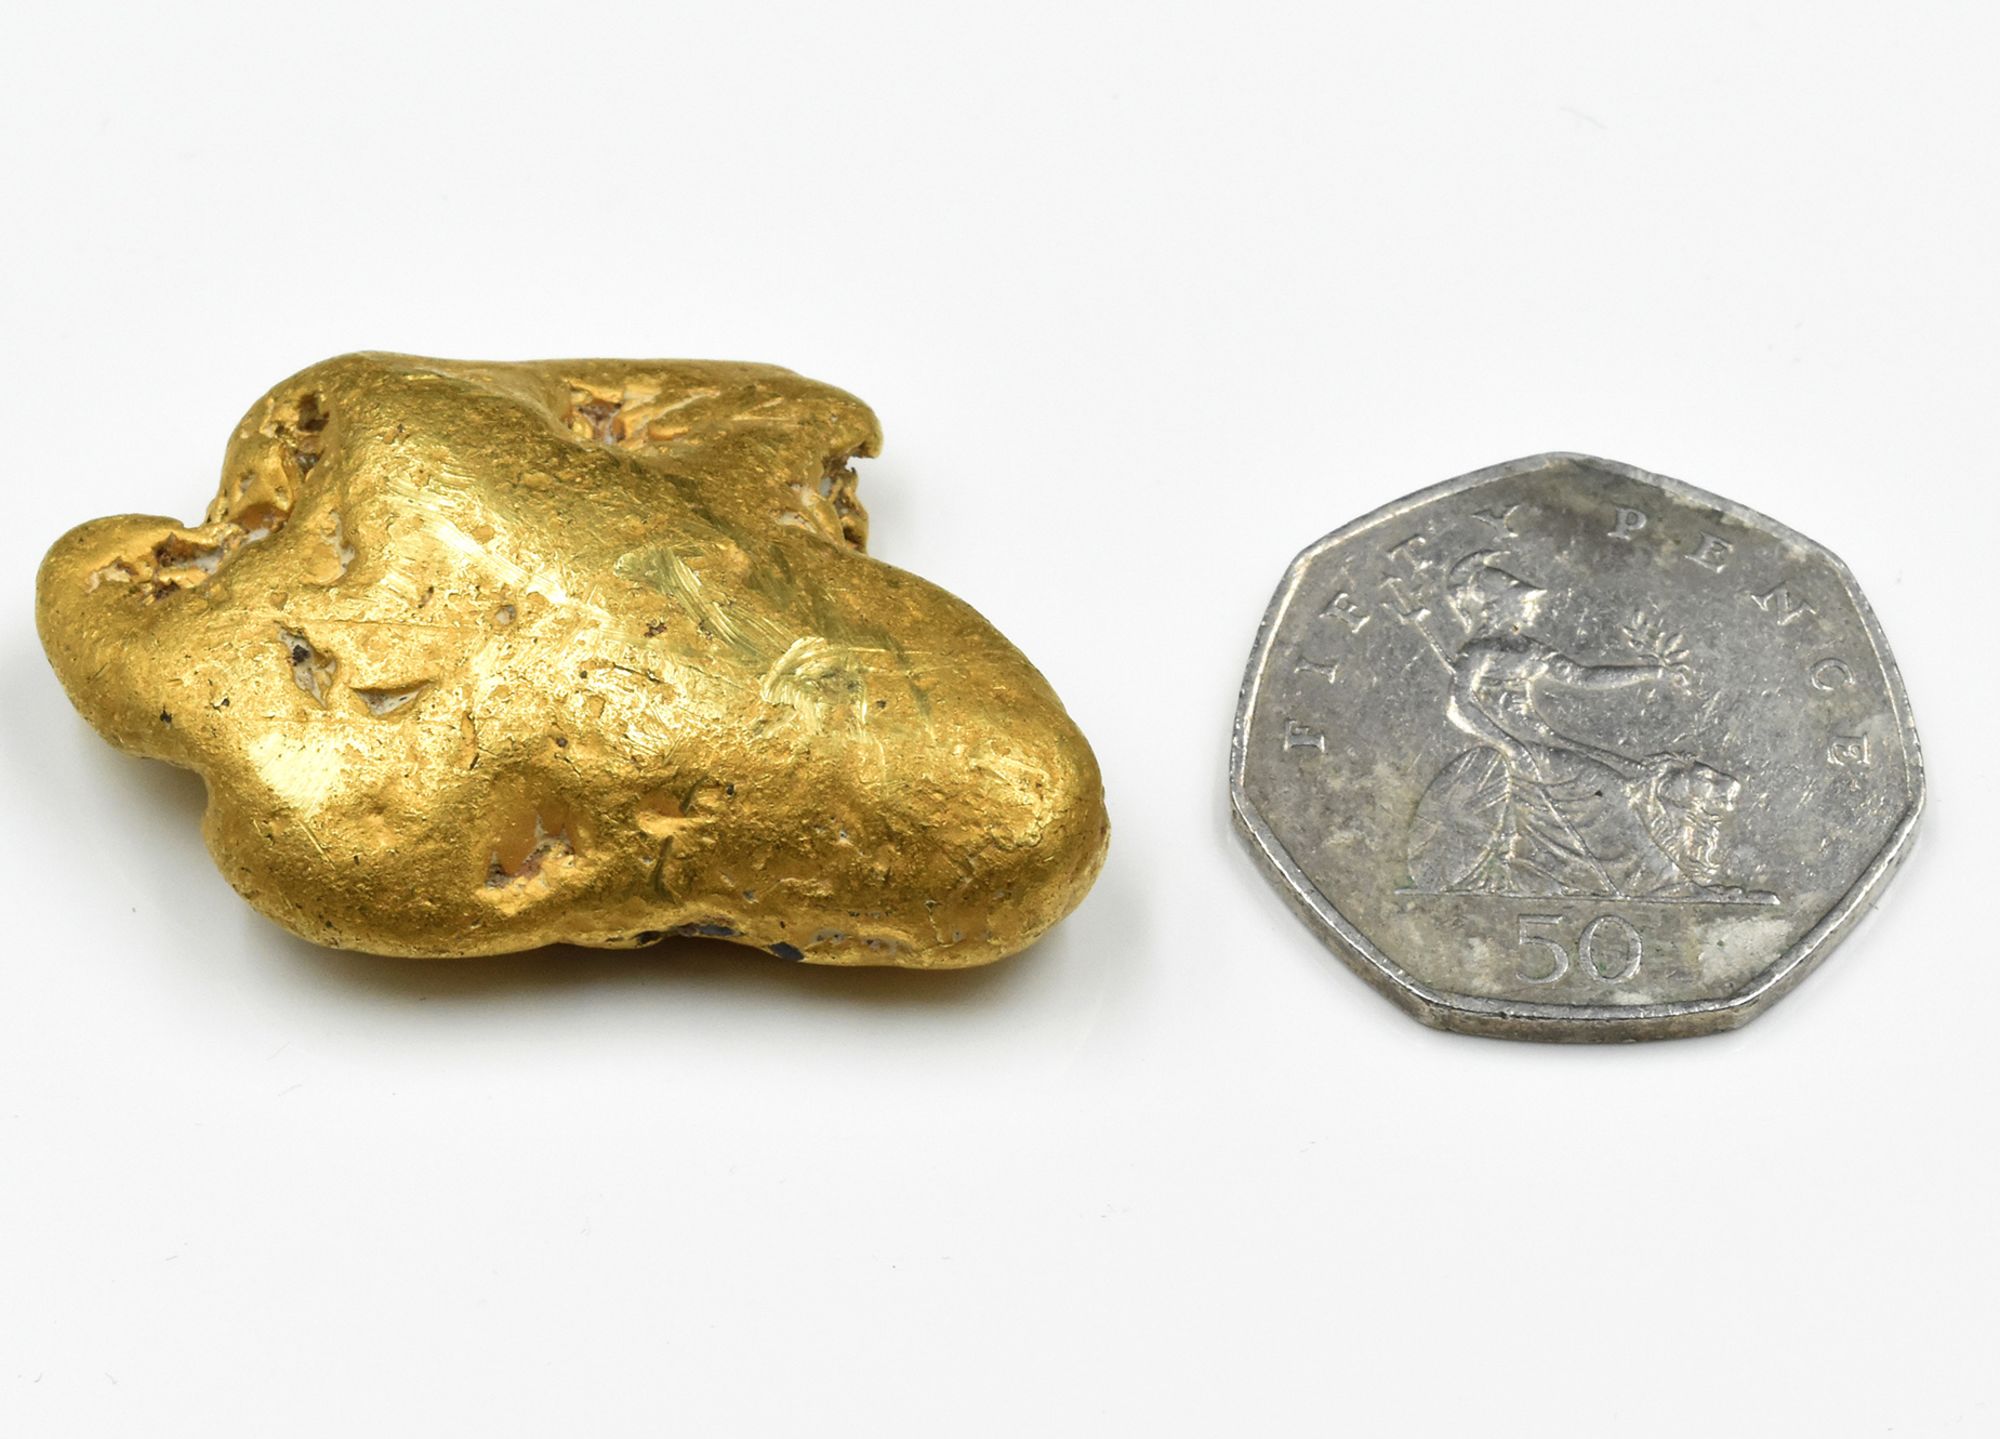 The gold nugget, shown next to a UK 50 pence coin for size.